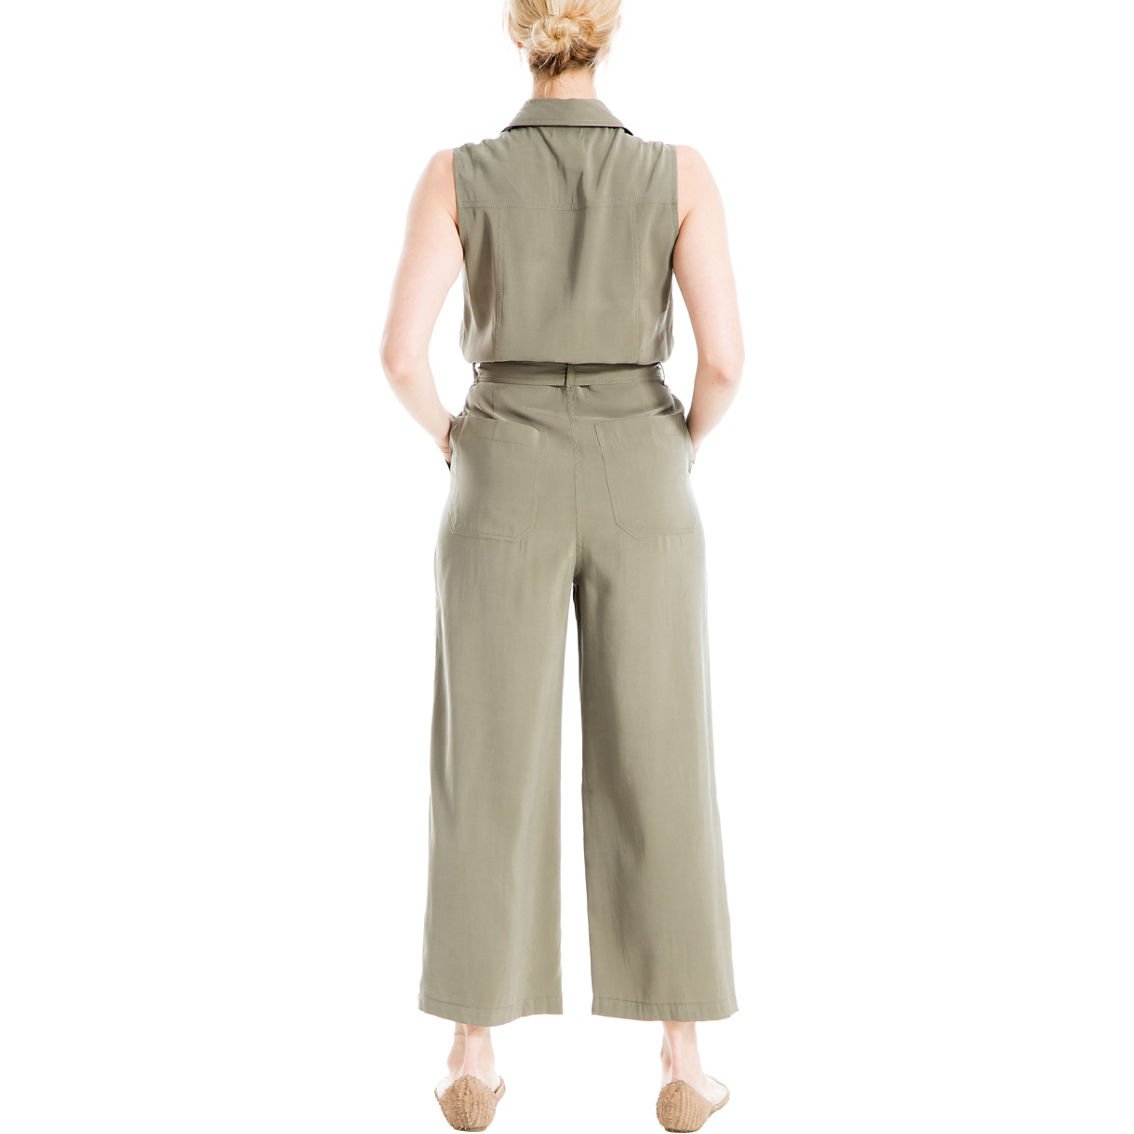 Max Studio Button Top Jumpsuit with Tie - Image 2 of 3